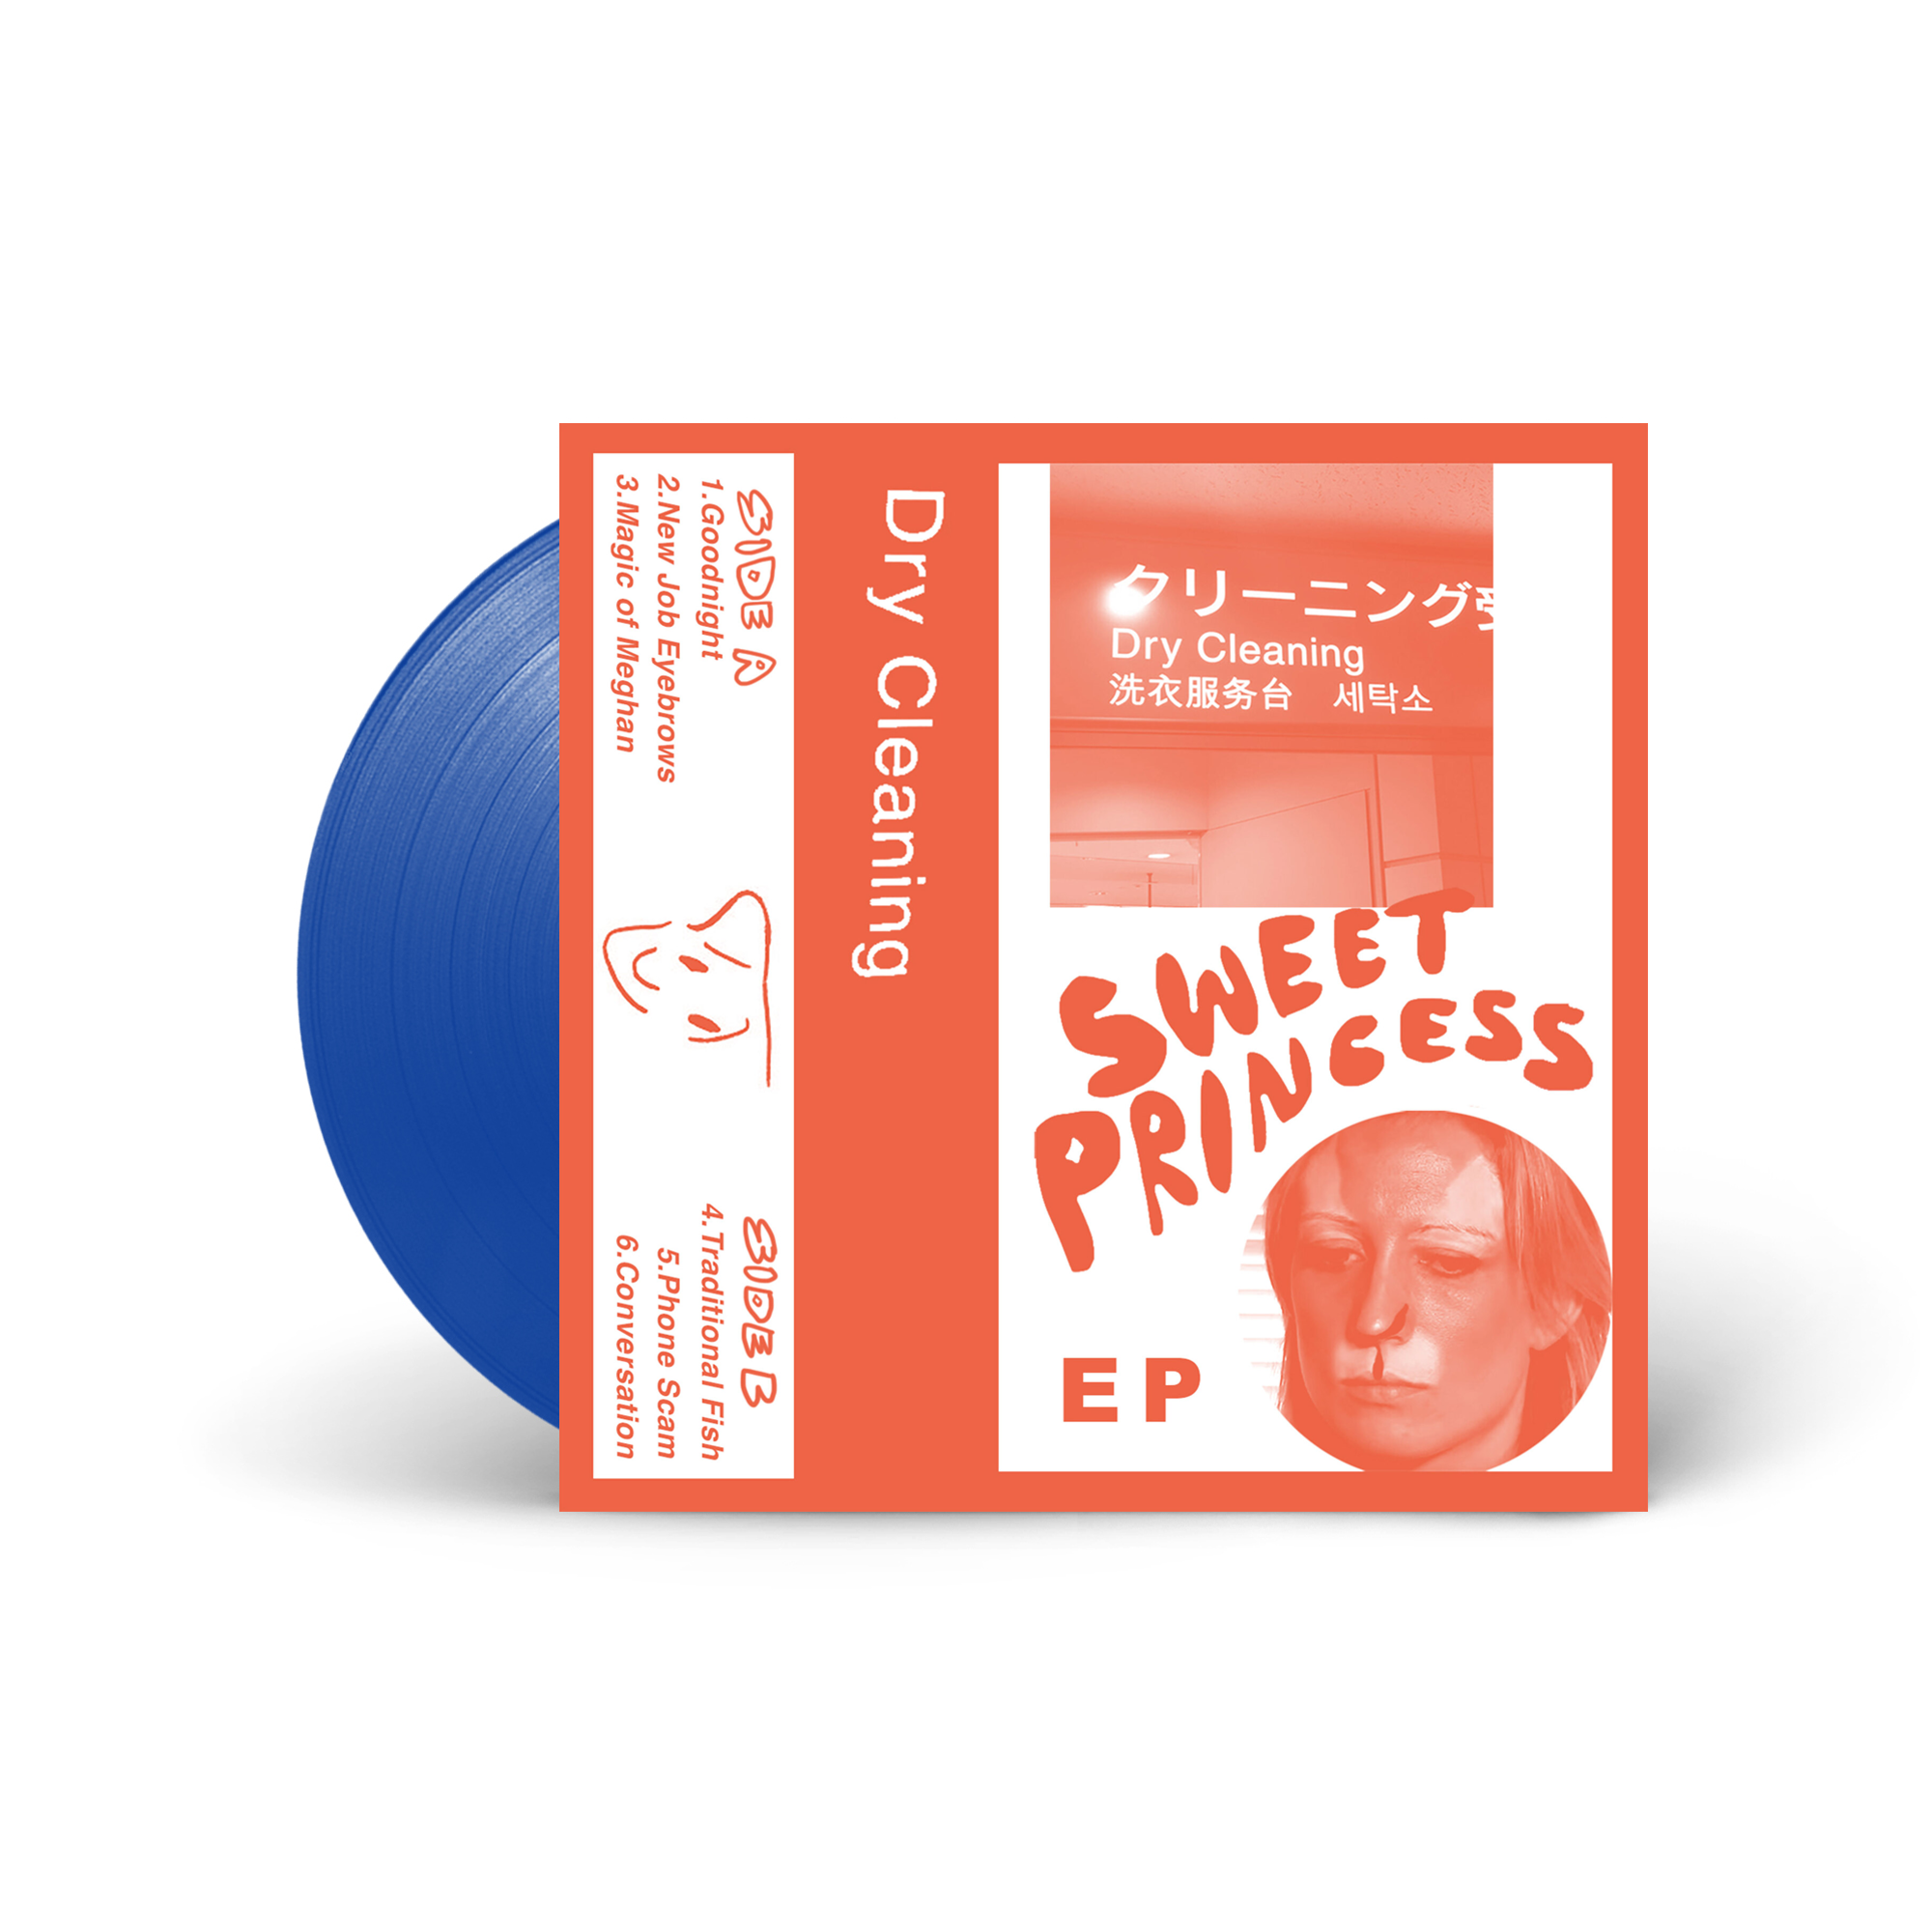 Dry Cleaning - Boundary Road Snacks and Drinks + Sweet Princess EP: Limited Transparent Blue Vinyl LP